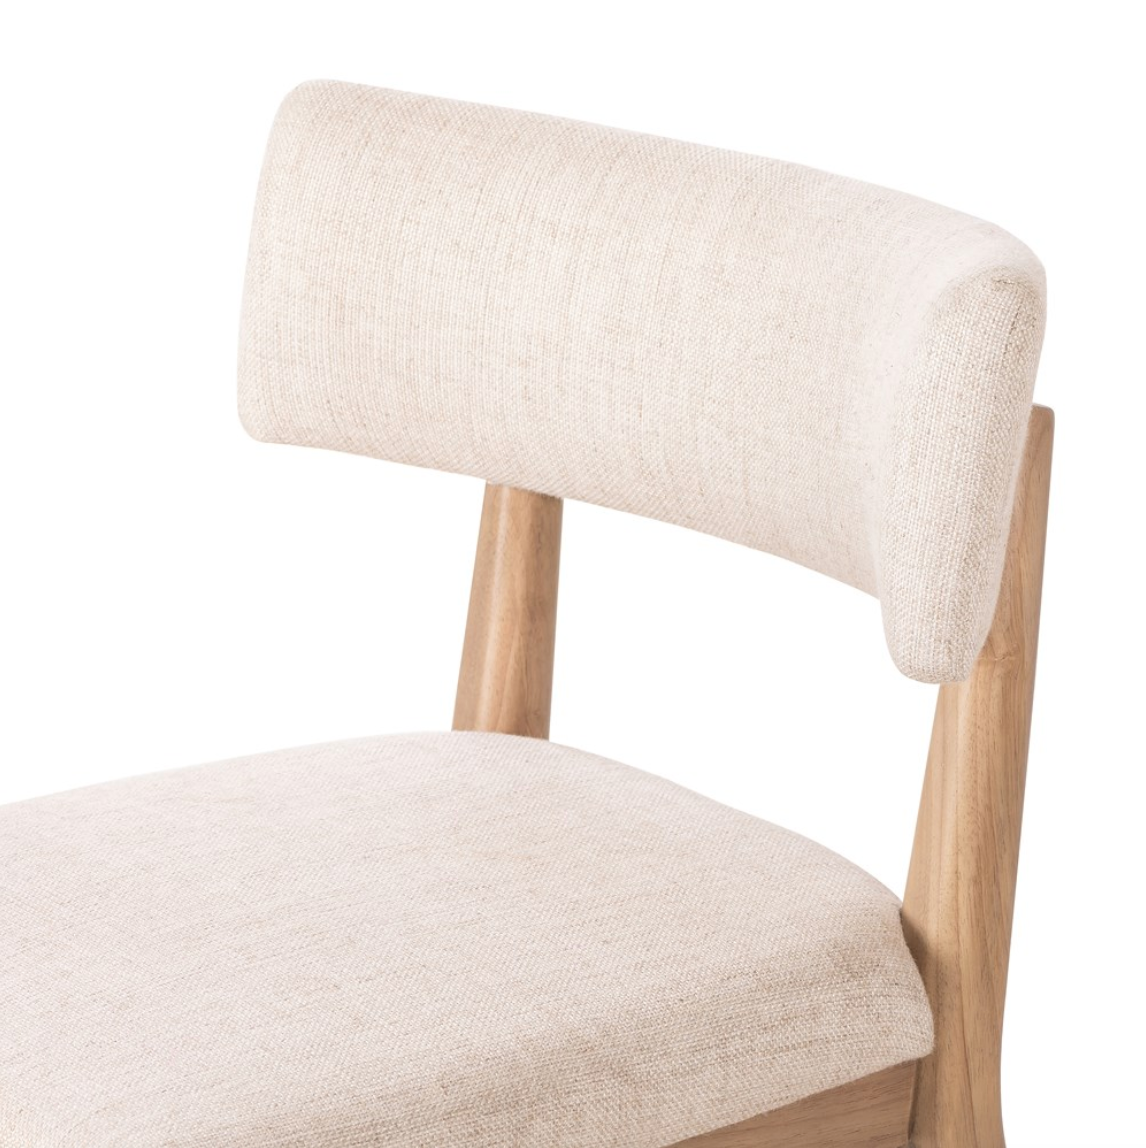 Cardell Essence Natural Dining Chair